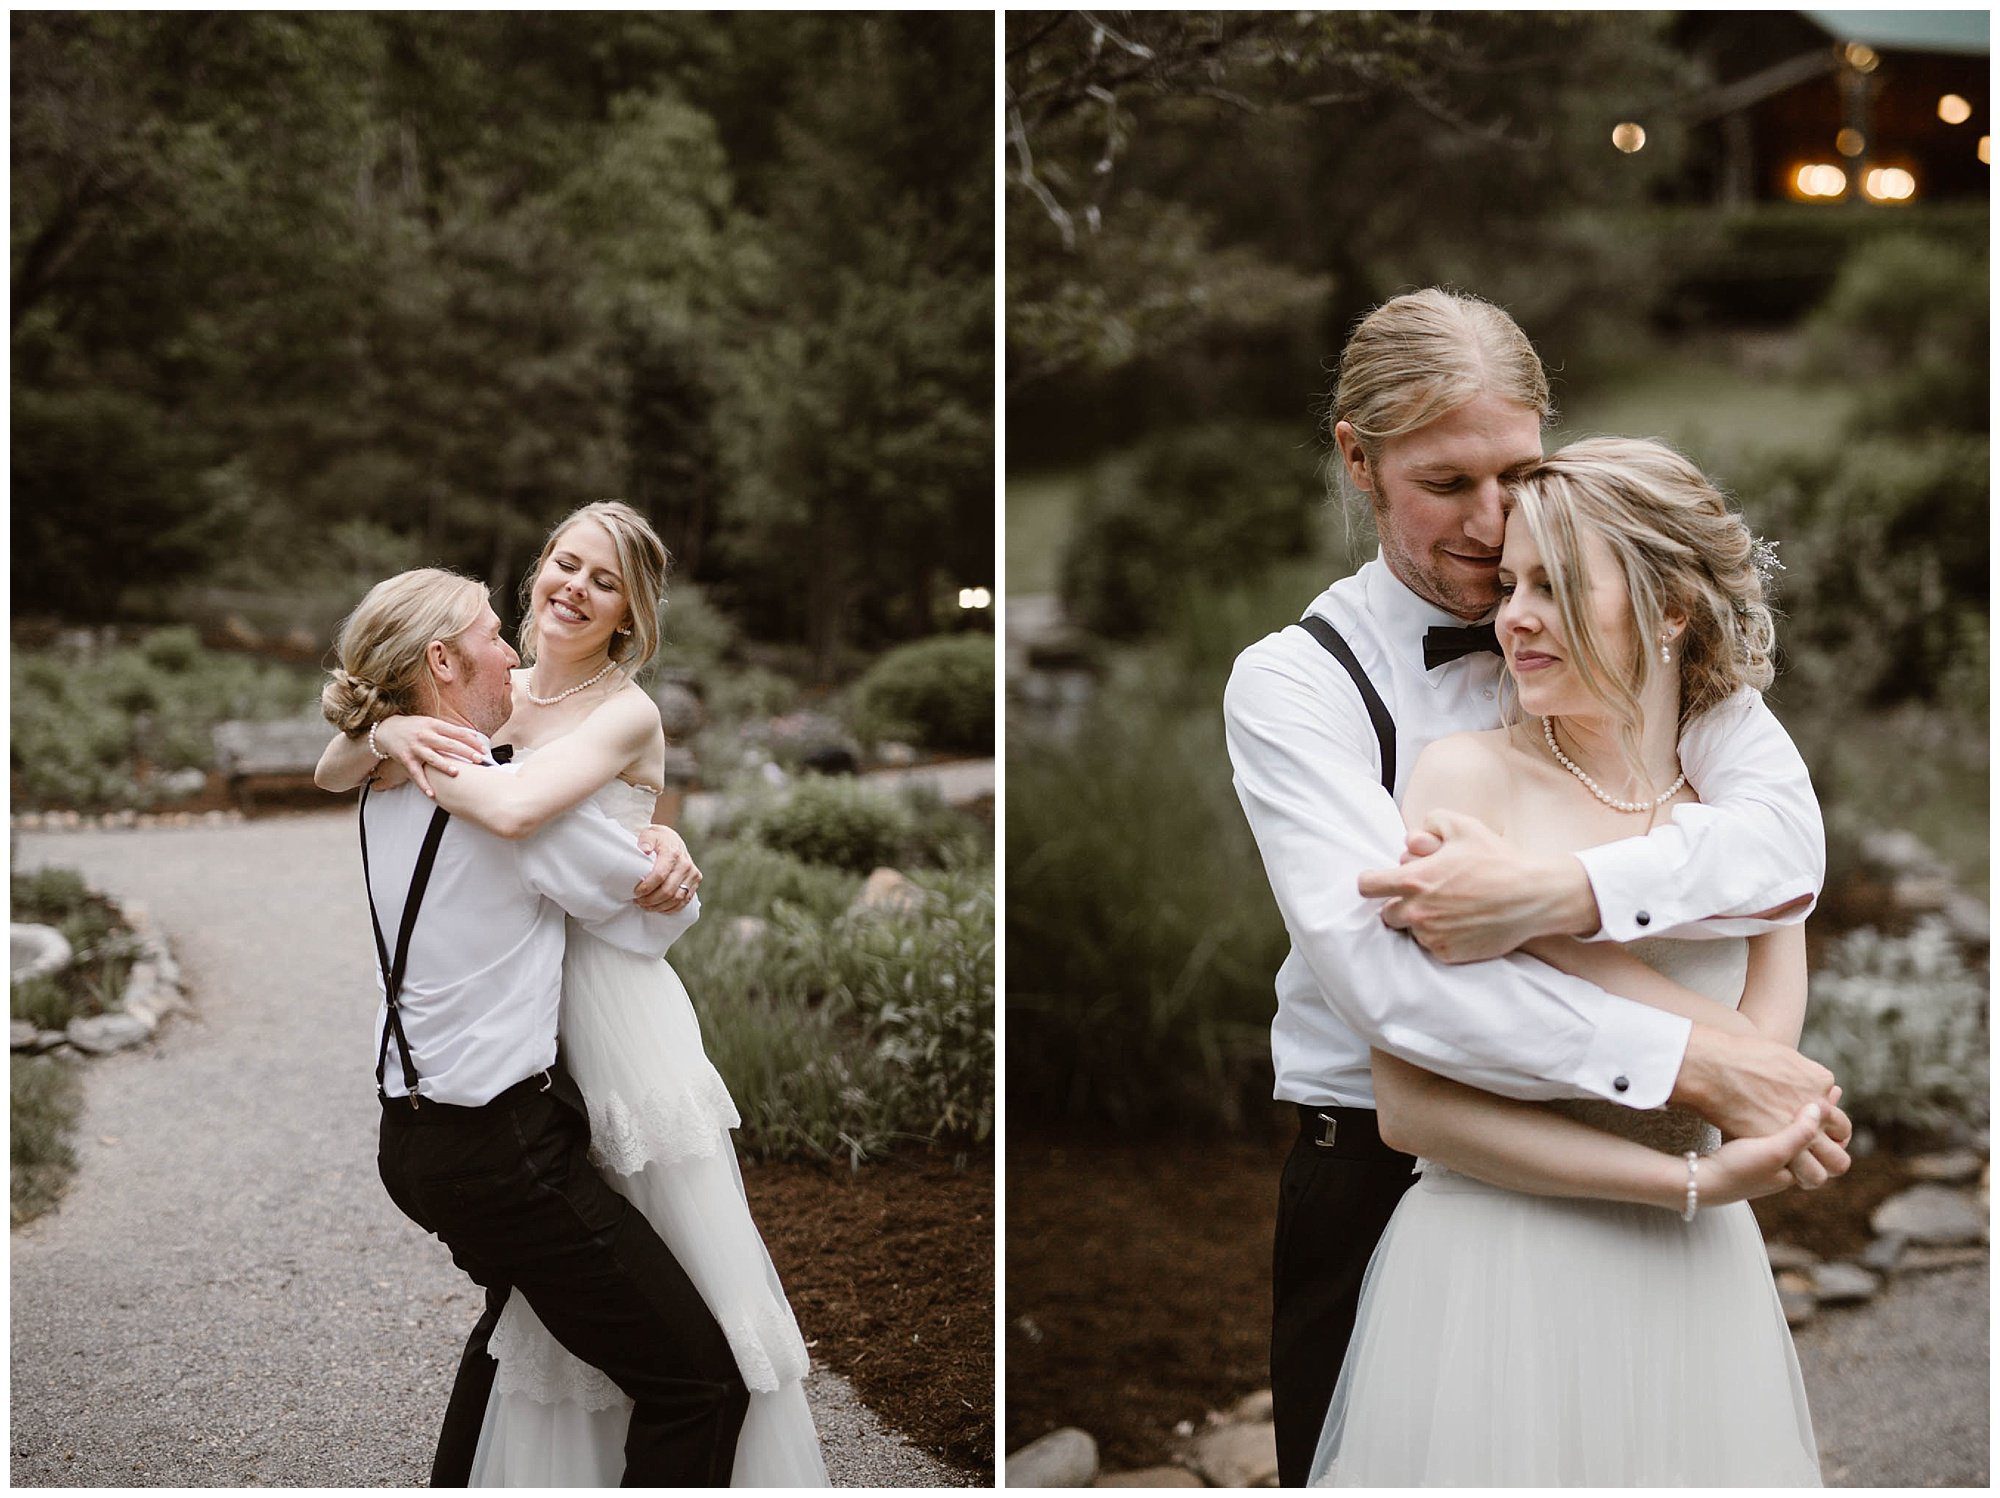 Couple Photos at rustic mountain wedding in Tennessee